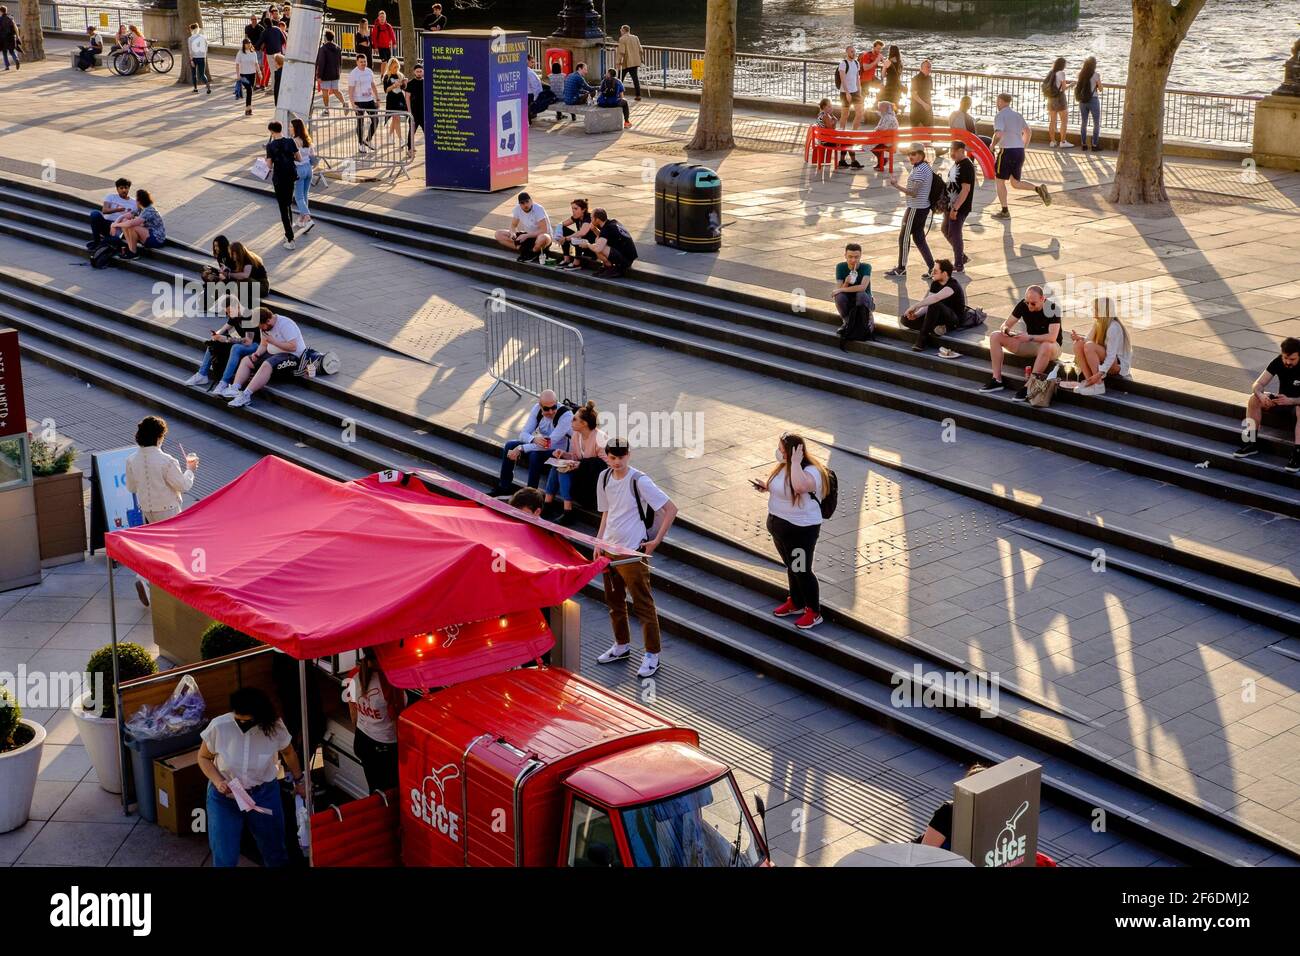 People enjoying the Spring sunshine on London's South Bank following the UK Government's easing of Covid restrictions permitting groups of up to six people or two households in England to meet outside. Stock Photo